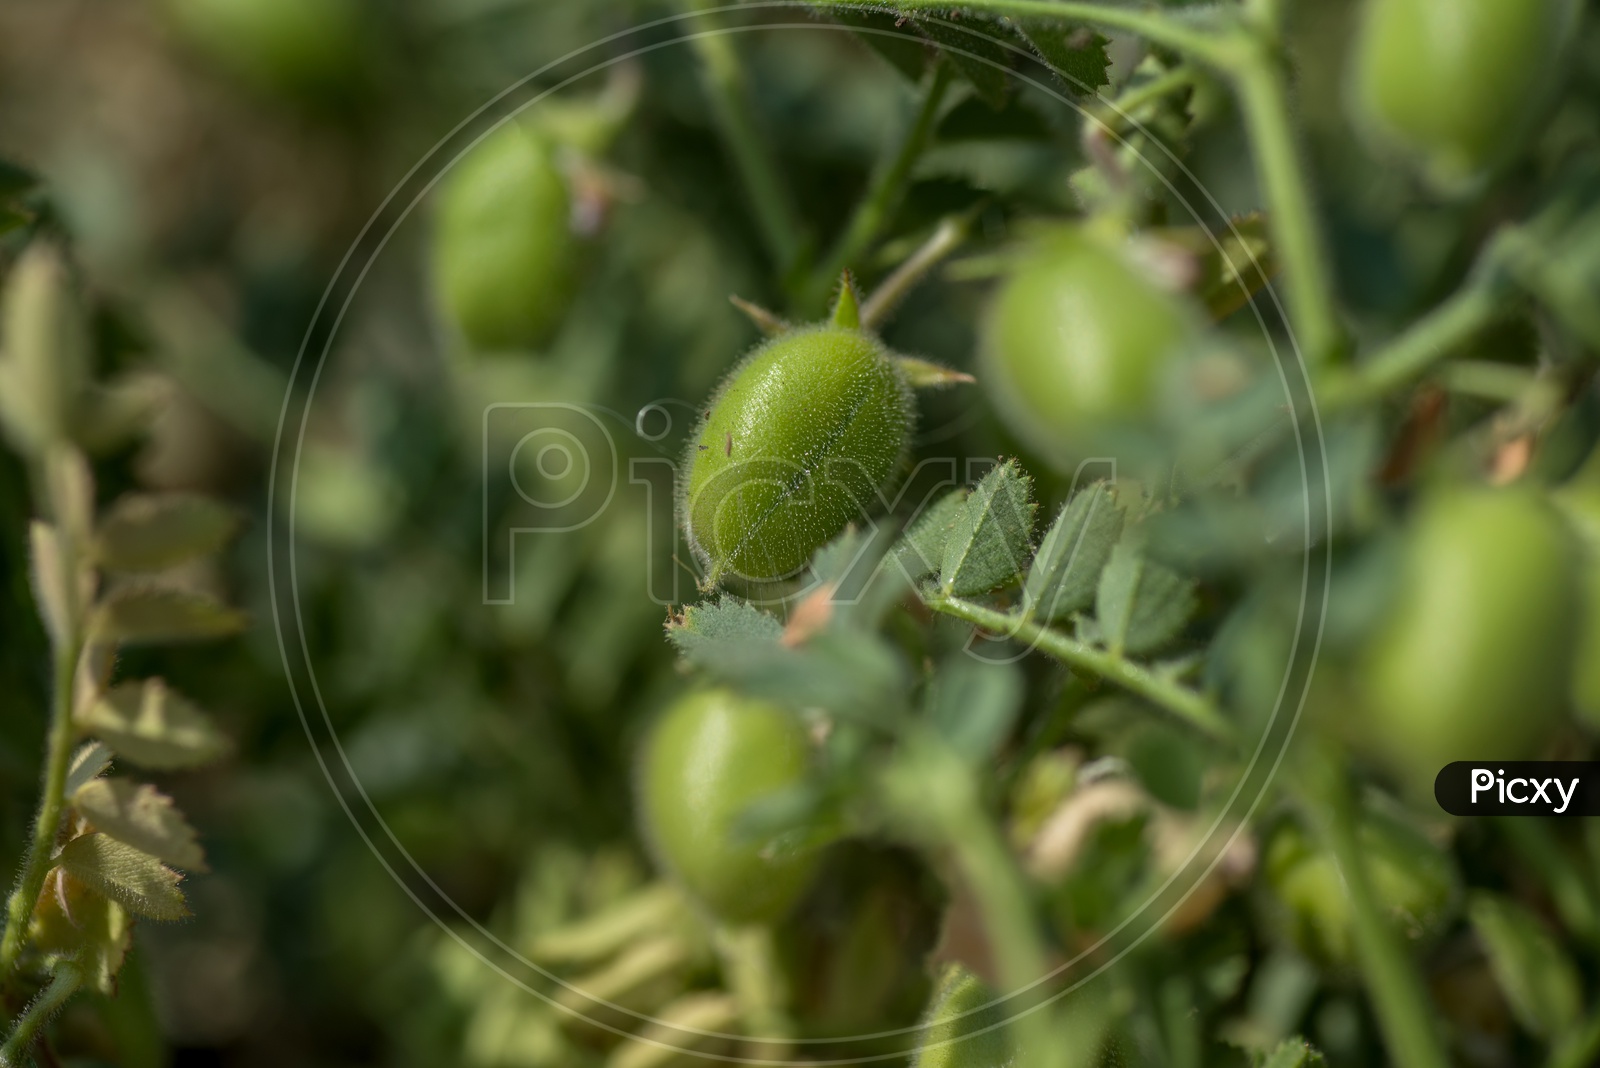 Chickpeas Pods On Green Young Plants  Growing In an Agricultural Farm